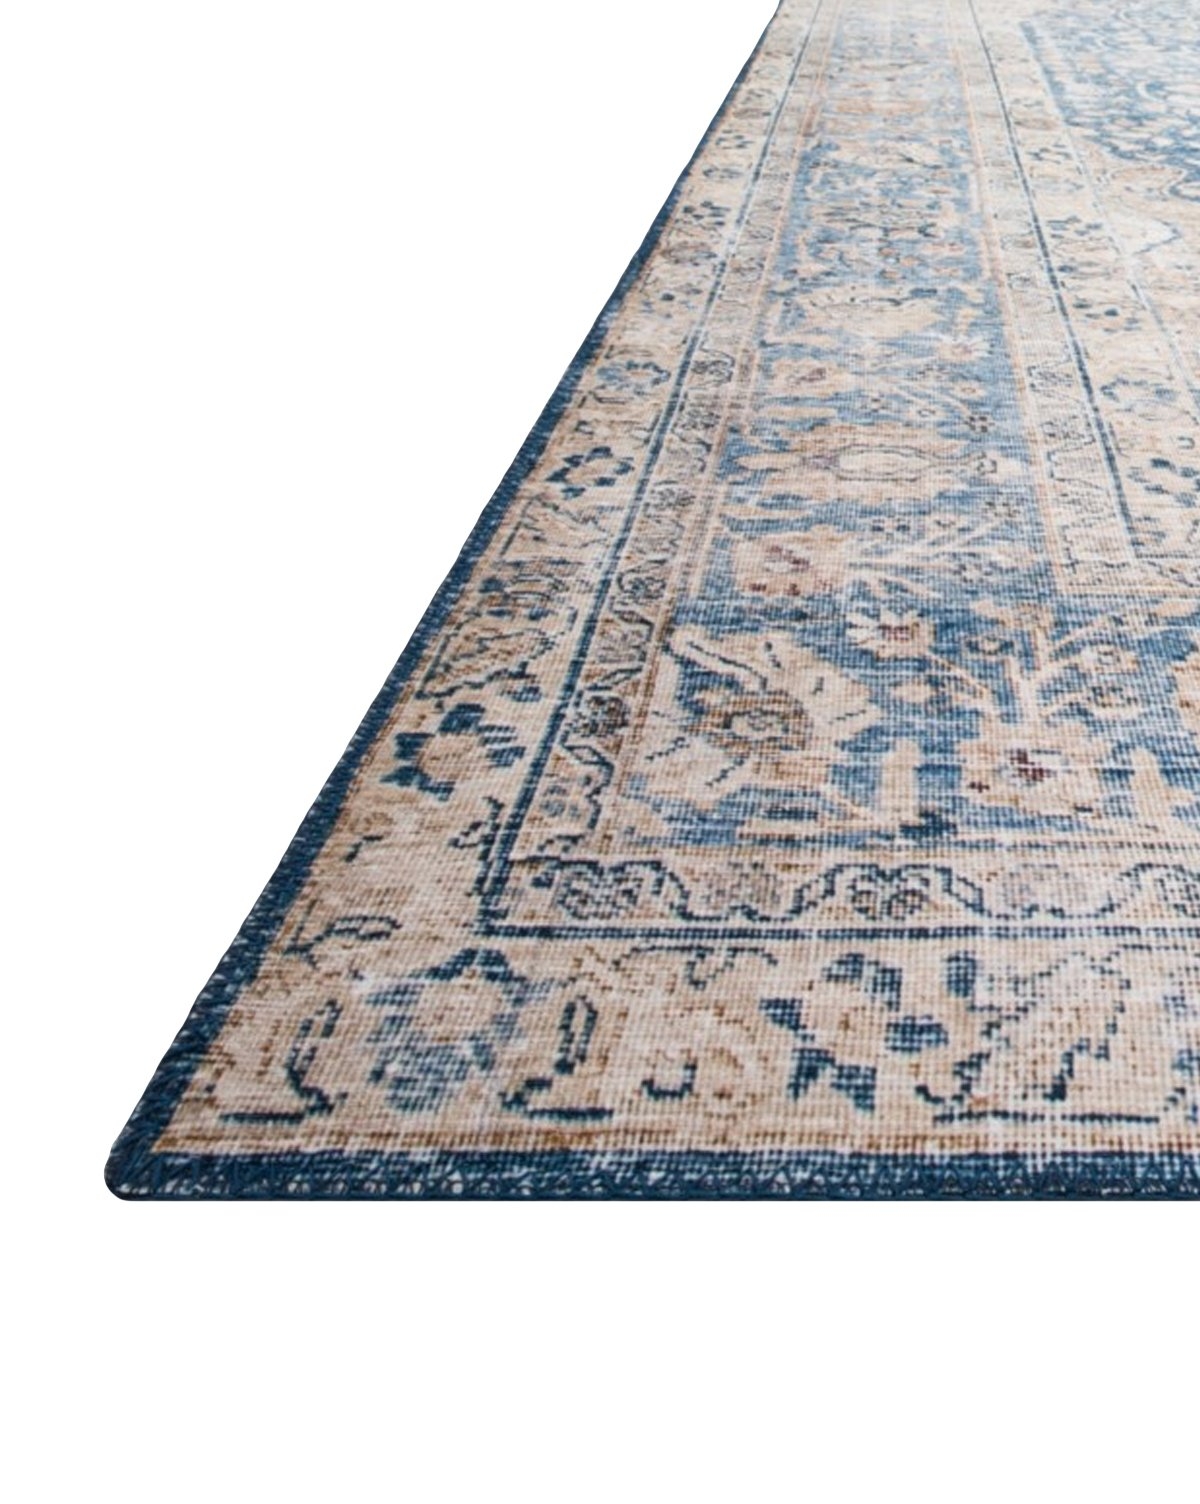 WHITLEY PATTERNED RUG, 7'6" x 9'6" - Image 2